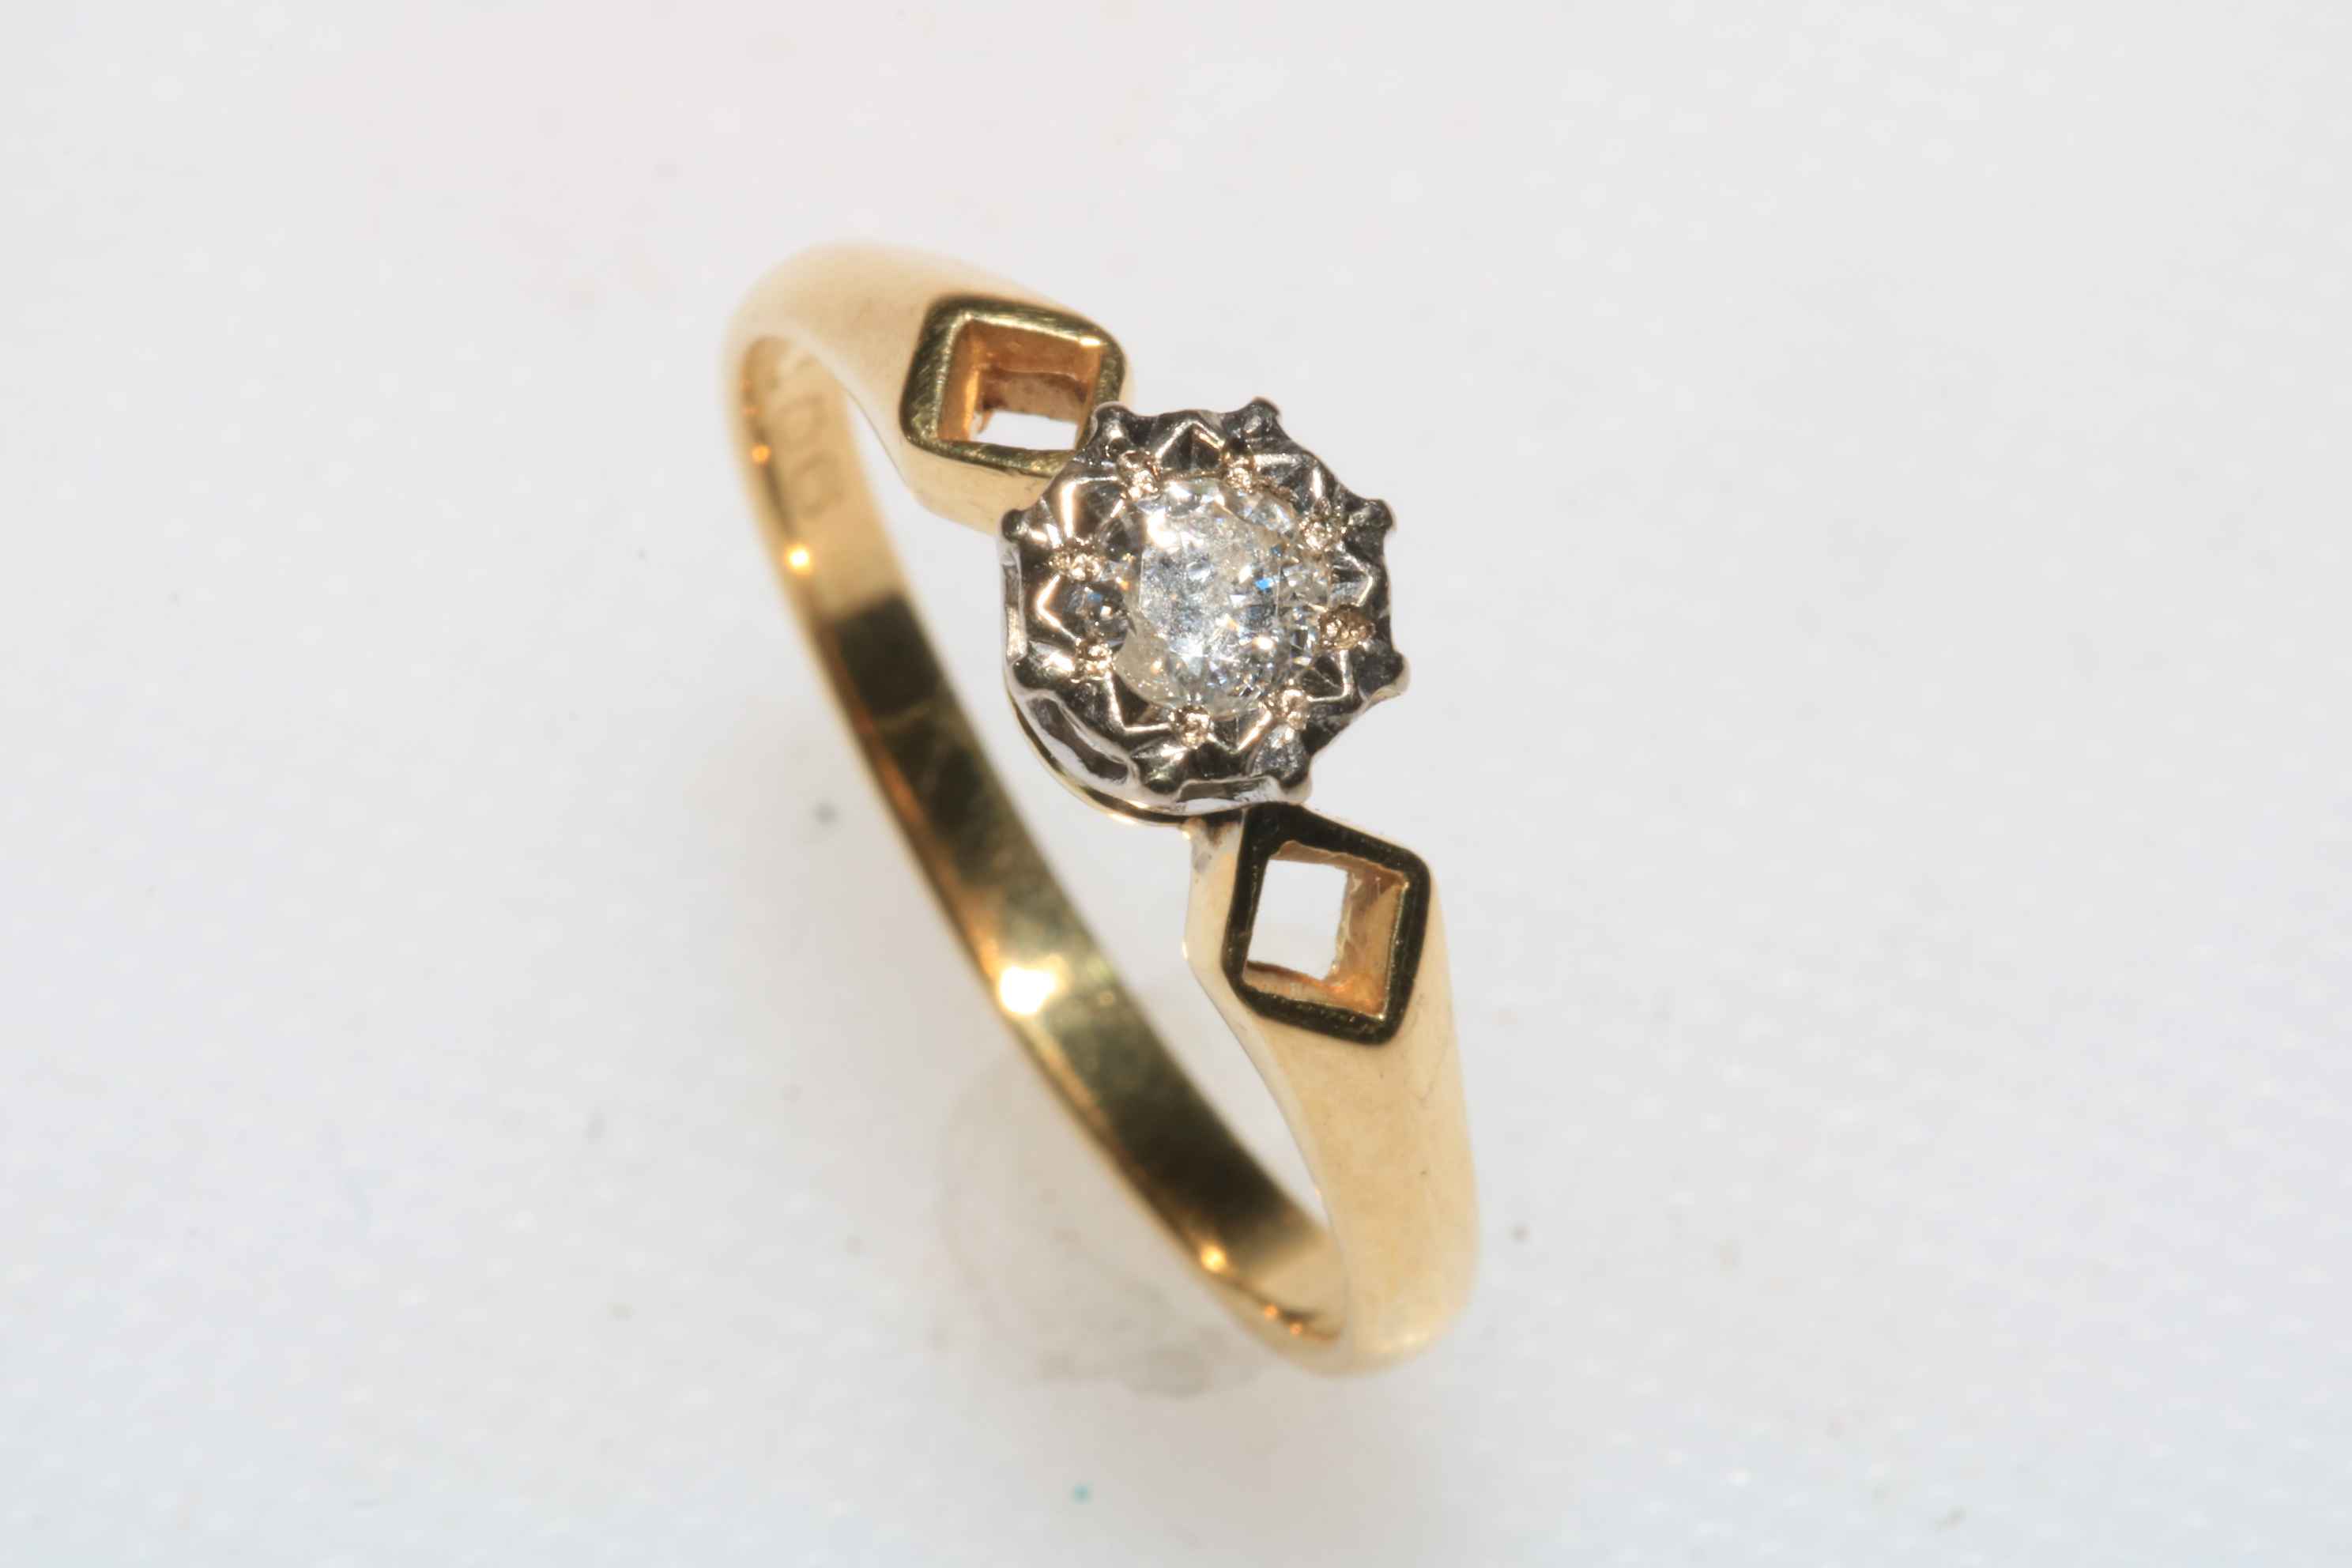 Diamond solitaire 18 carat yellow gold ring, size Q.